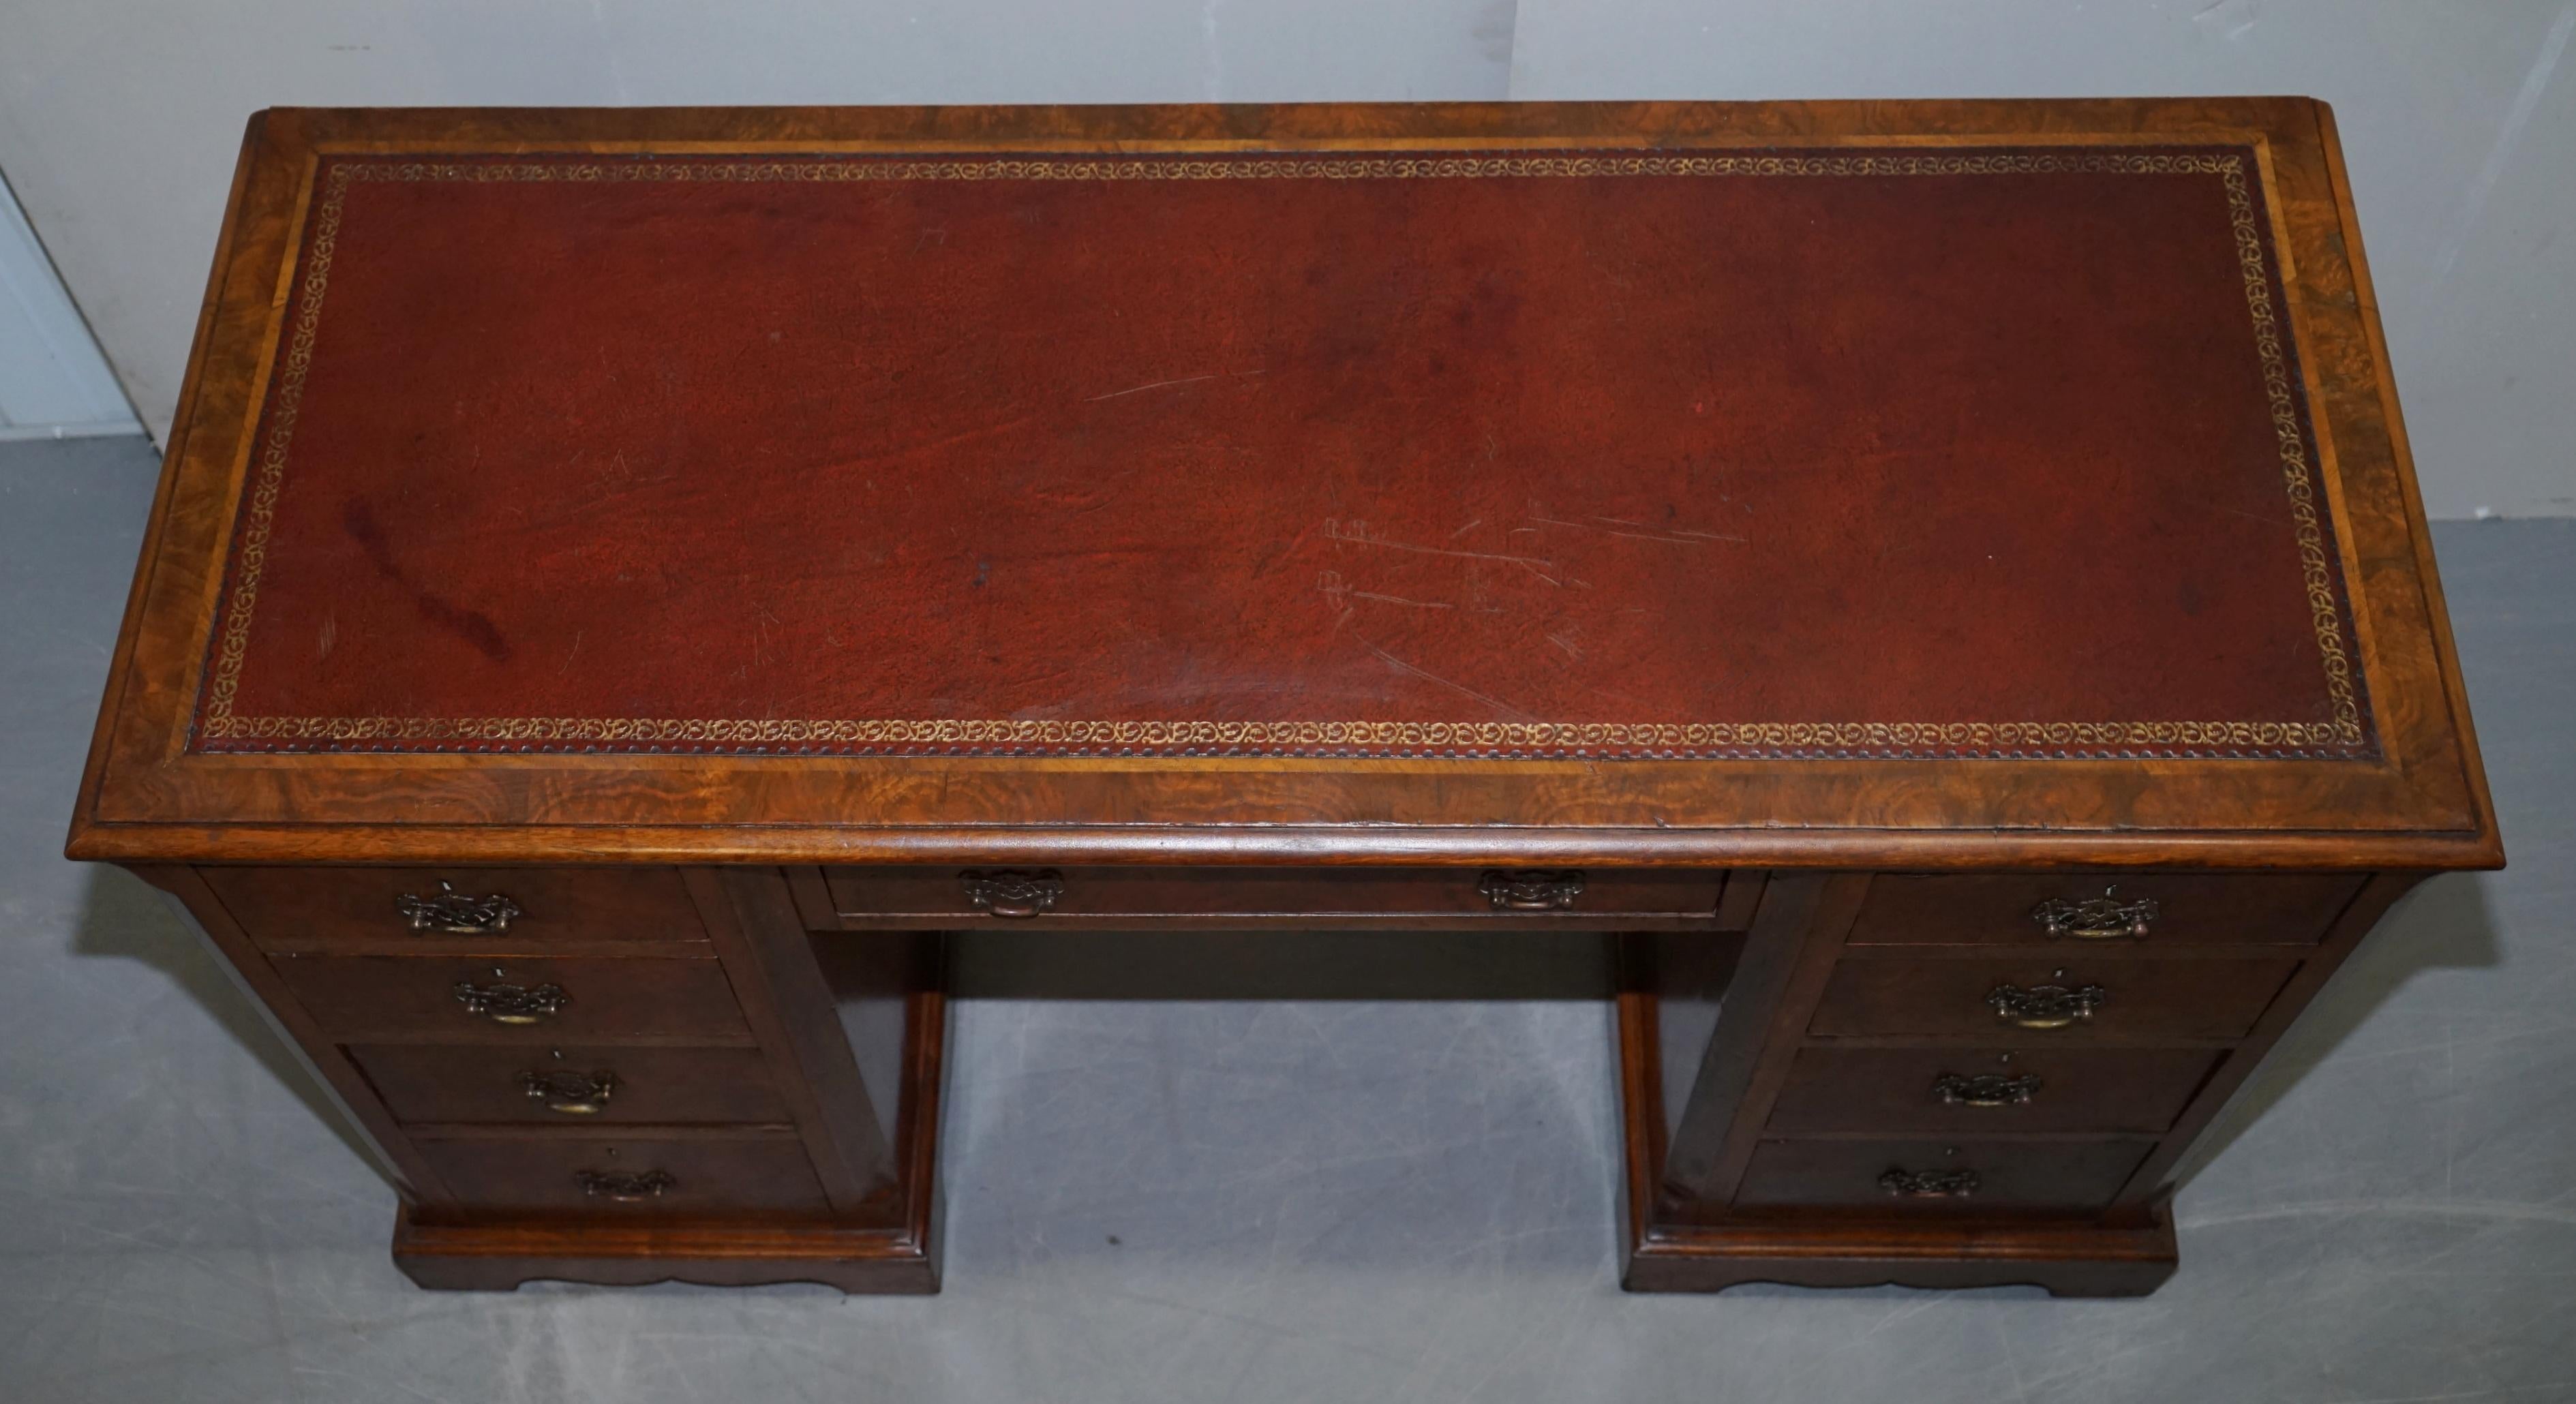 High Victorian Antique Victorian Burr Walnut Twin Pedestal Partner Desk with Brown Leather Top For Sale